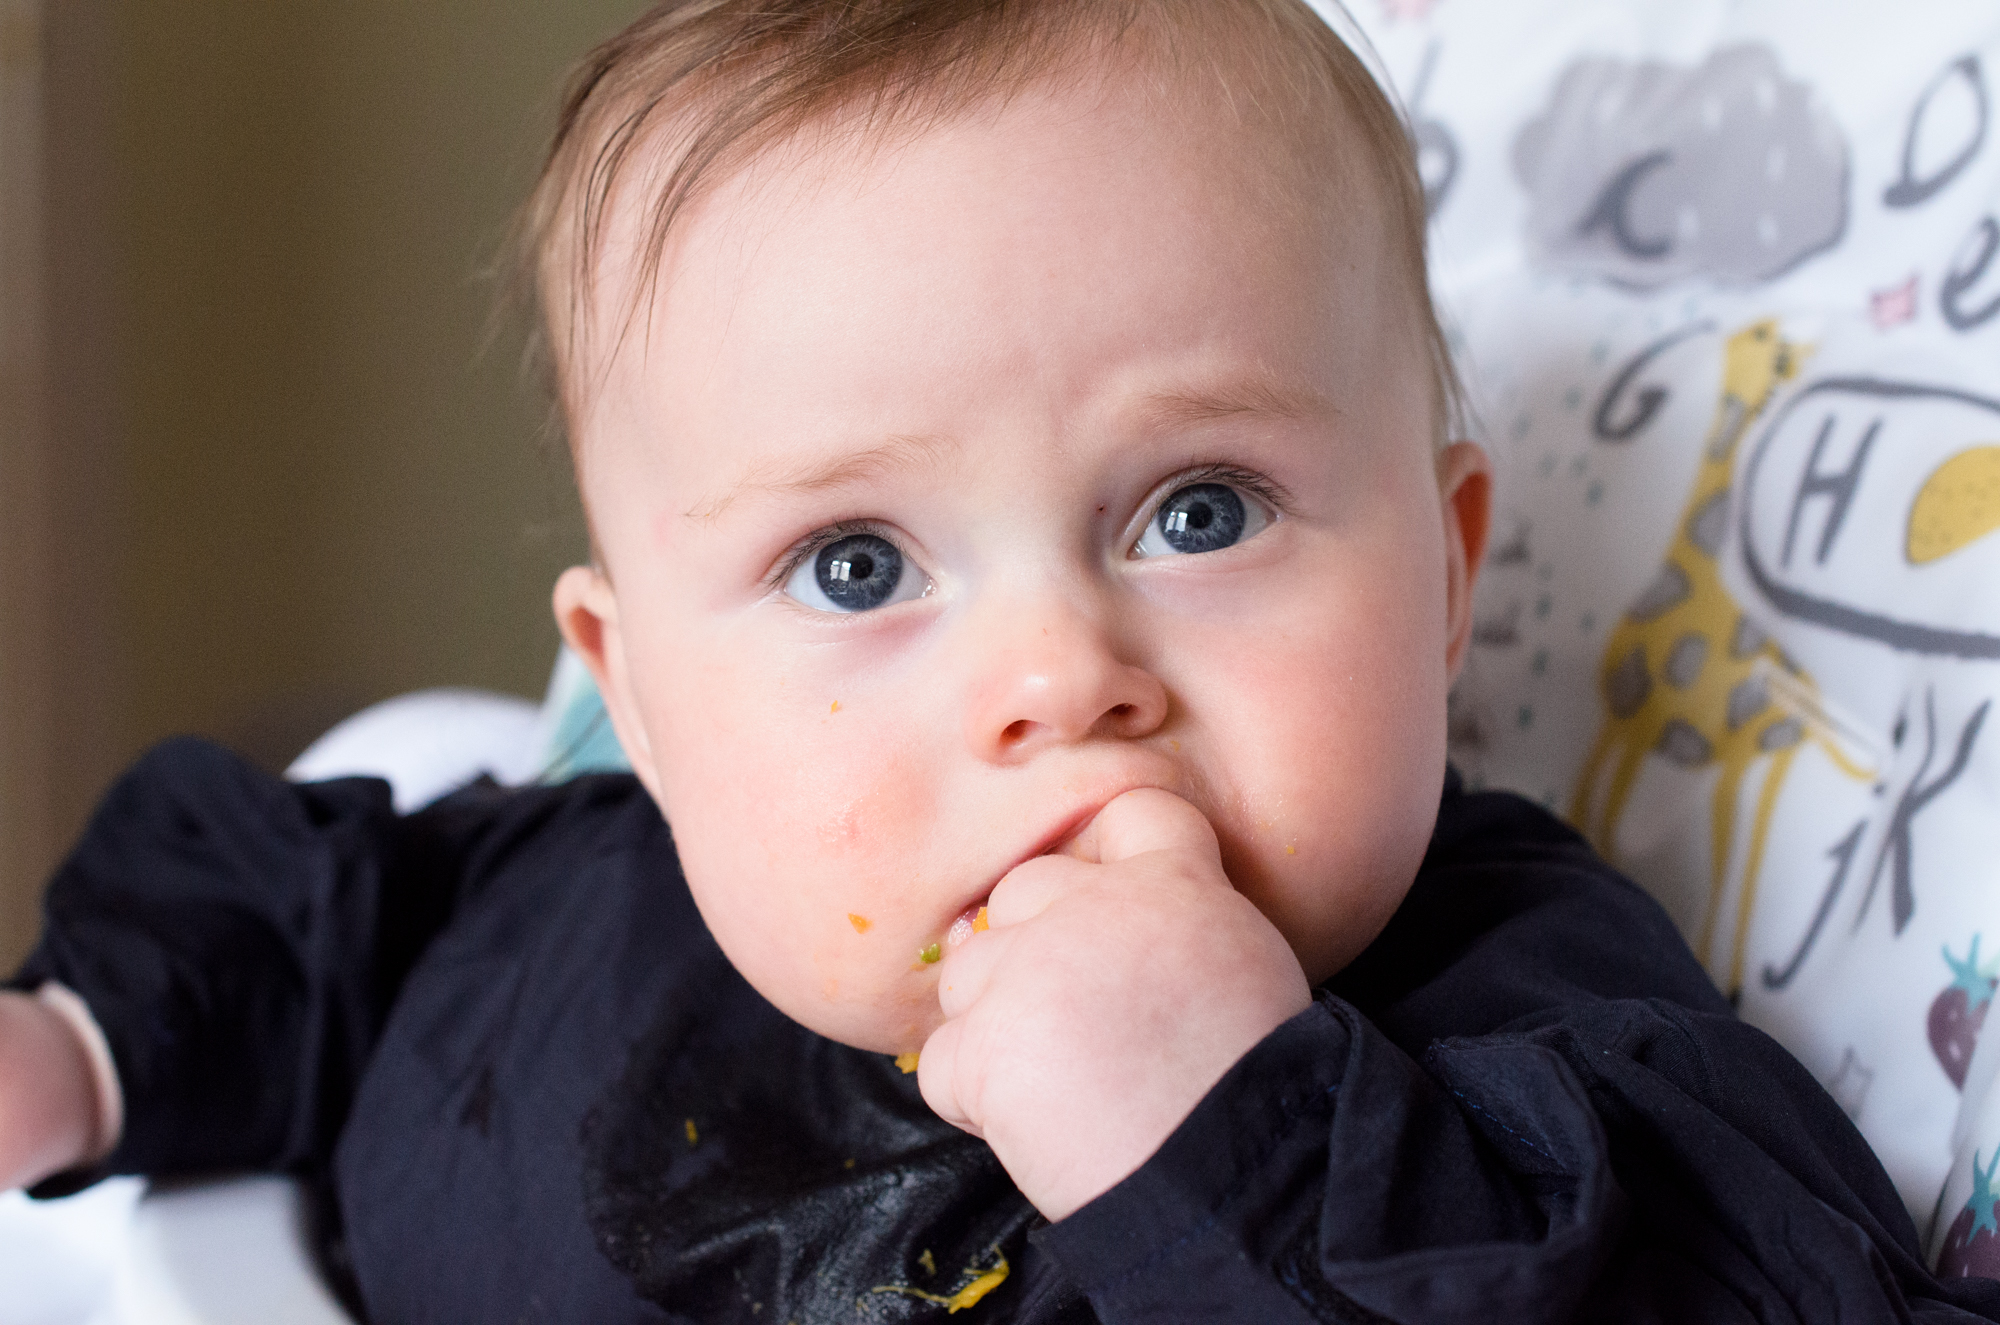 Cara has started solids and we're doing Baby Led Weaning